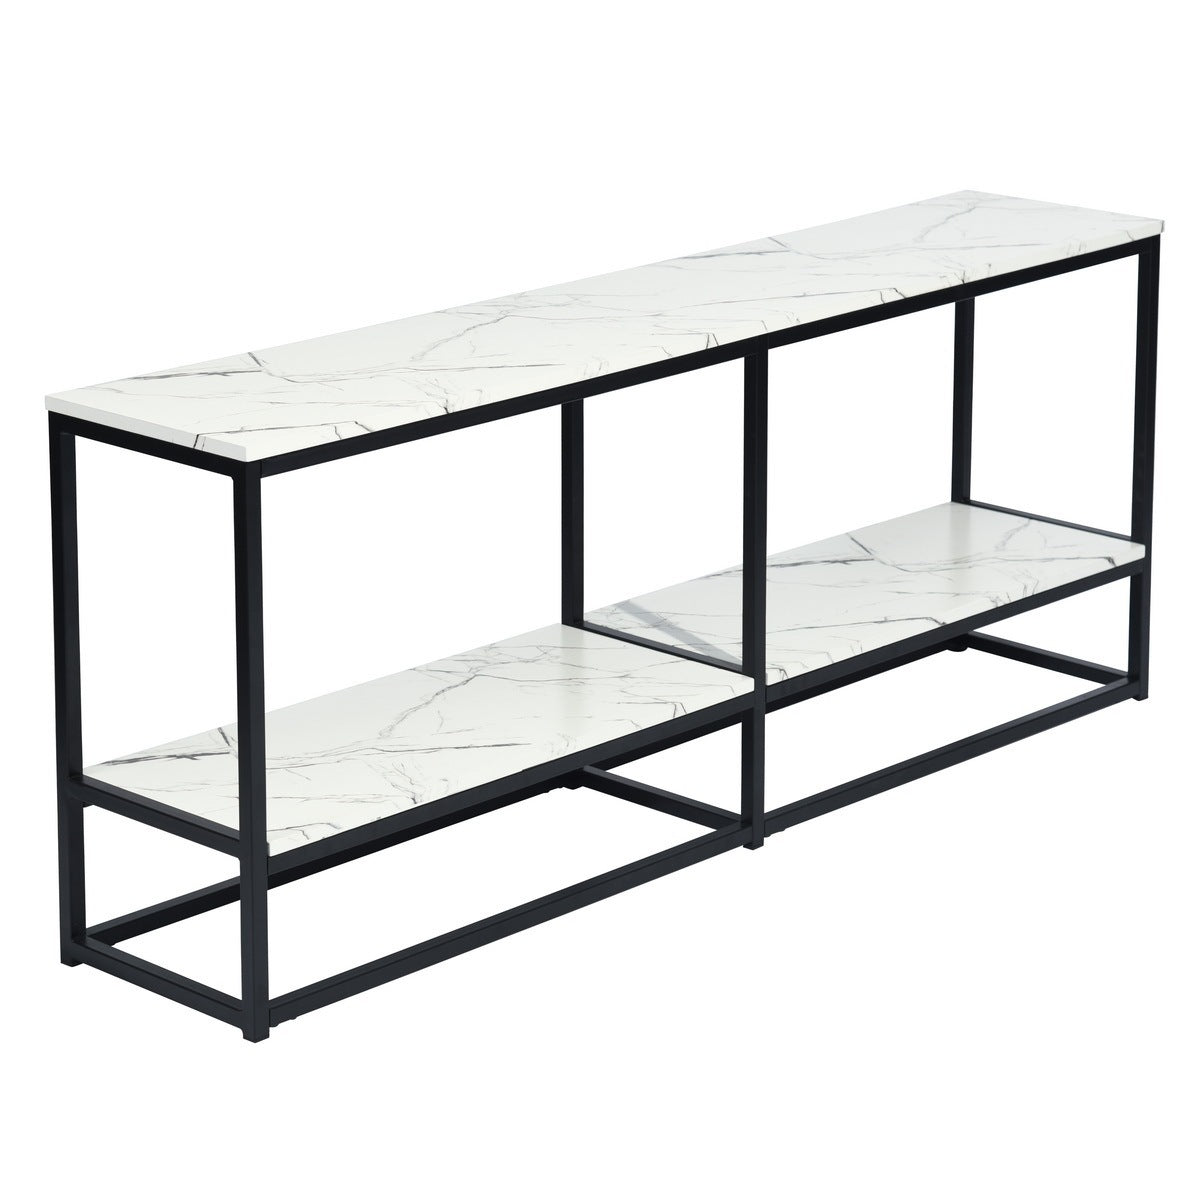 59.8" TV STAND for TV up to 65 Inches With Storage Tier, Marble & Black Home Elegance USA